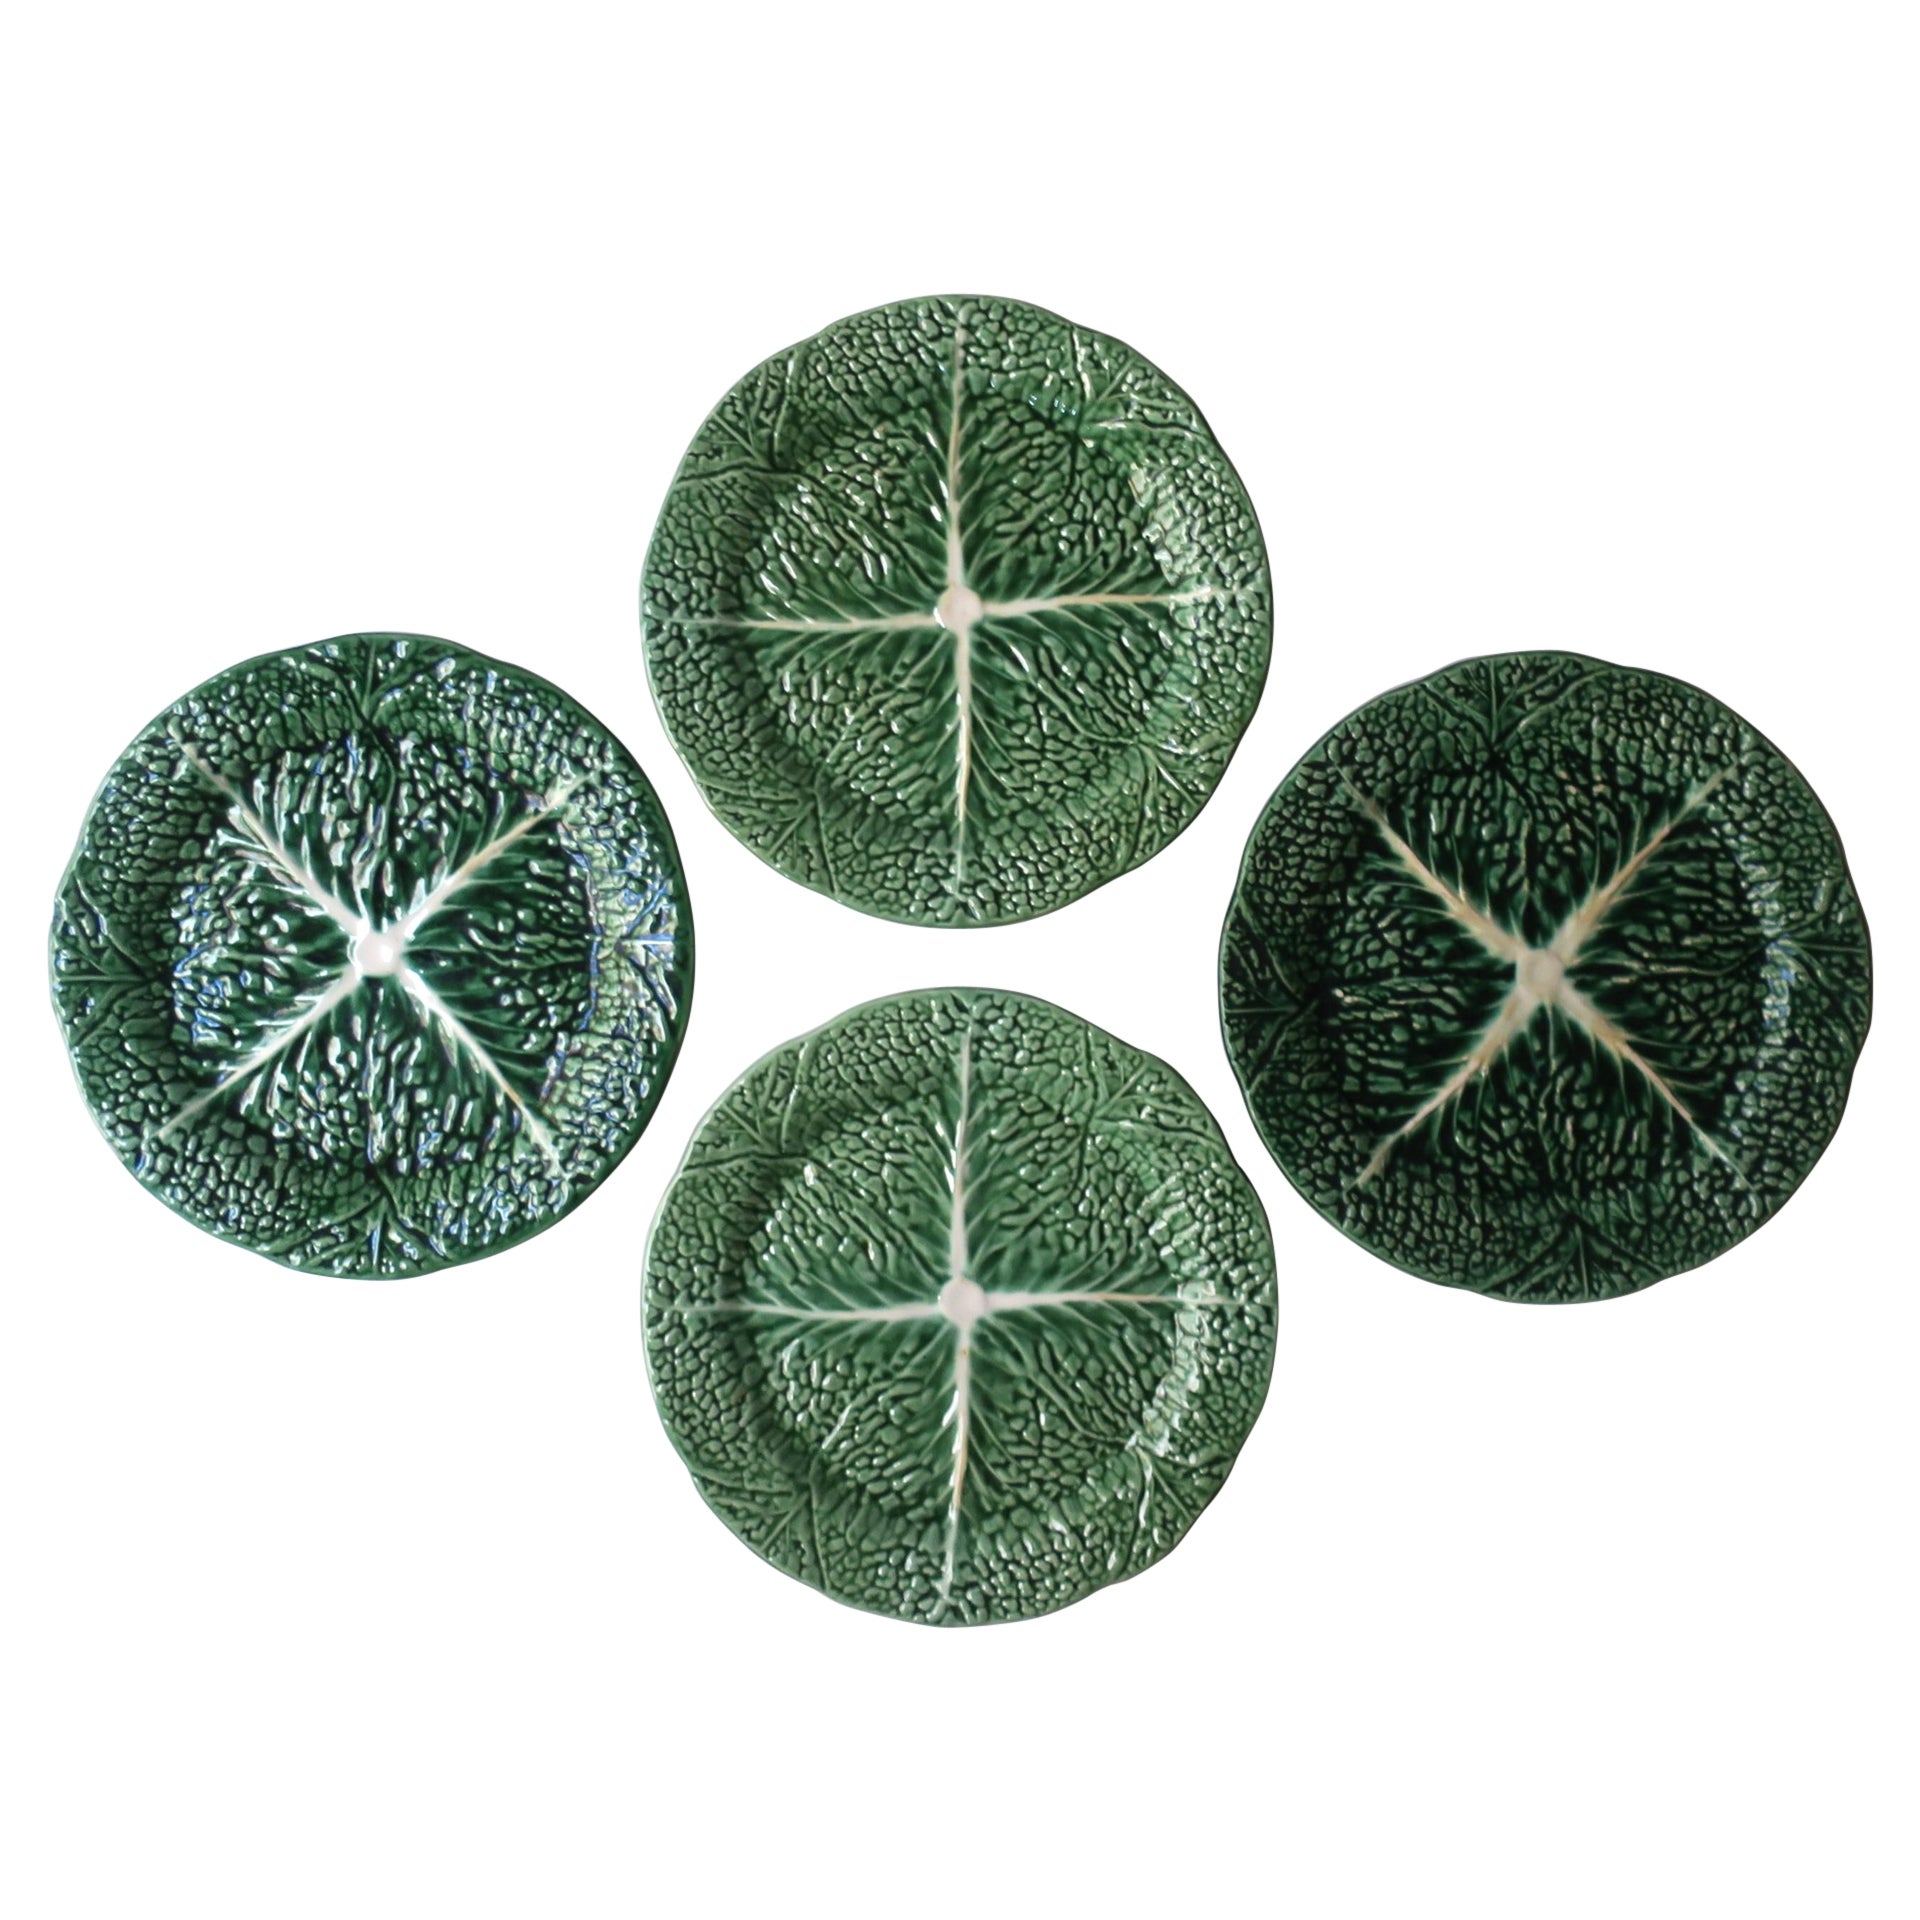 Lettuce or Cabbage Leaf Plates Green and White, Set of 4 For Sale